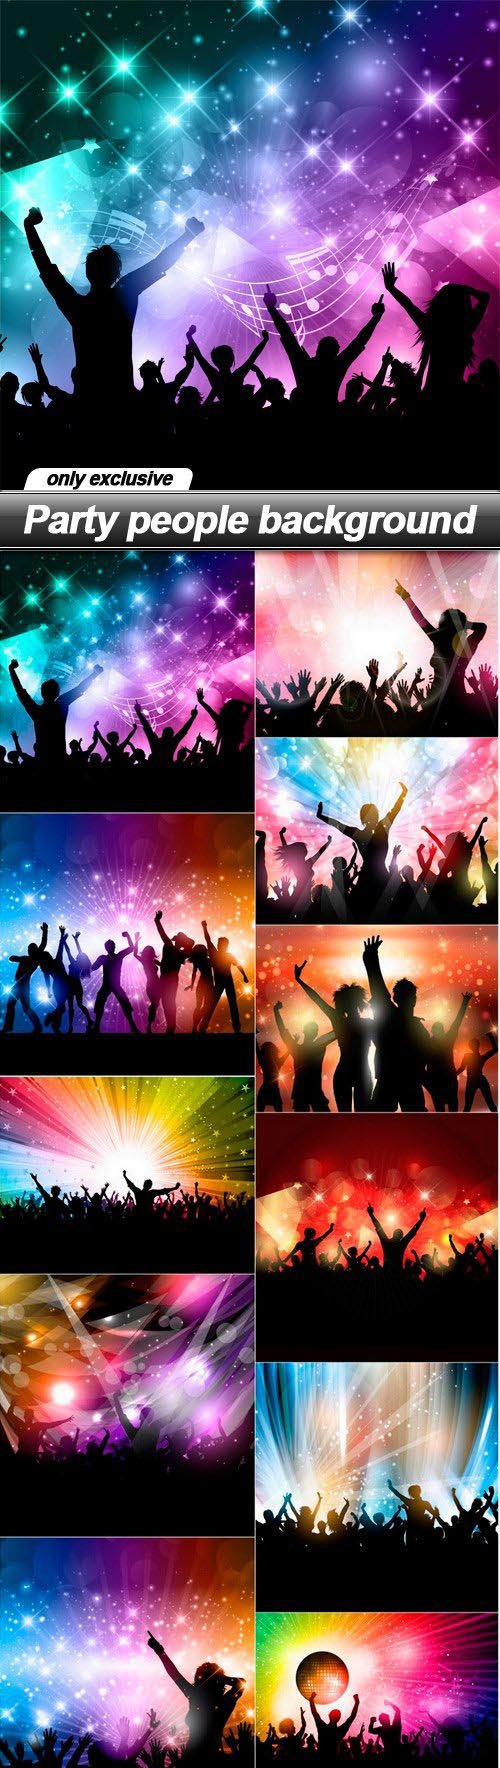 Party people background - 11 EPS